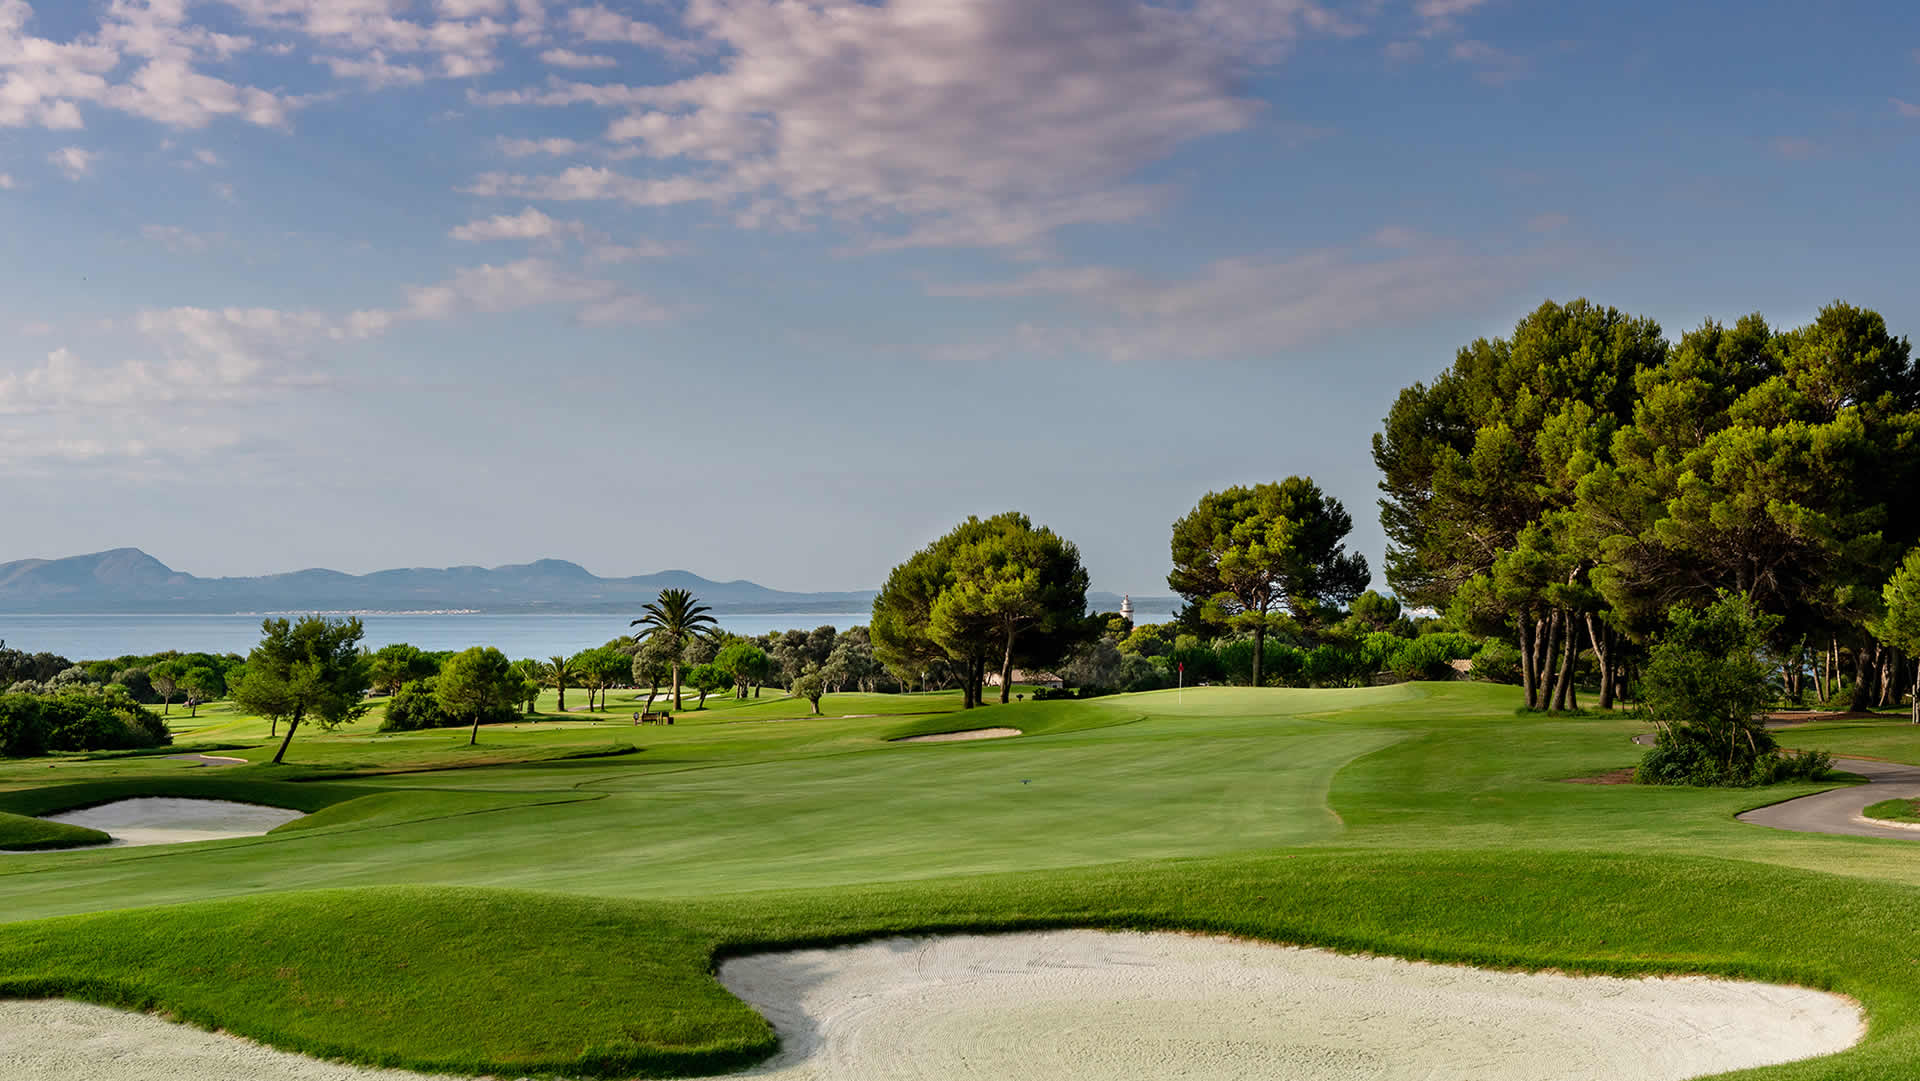 Excellent golf courses in mallorca